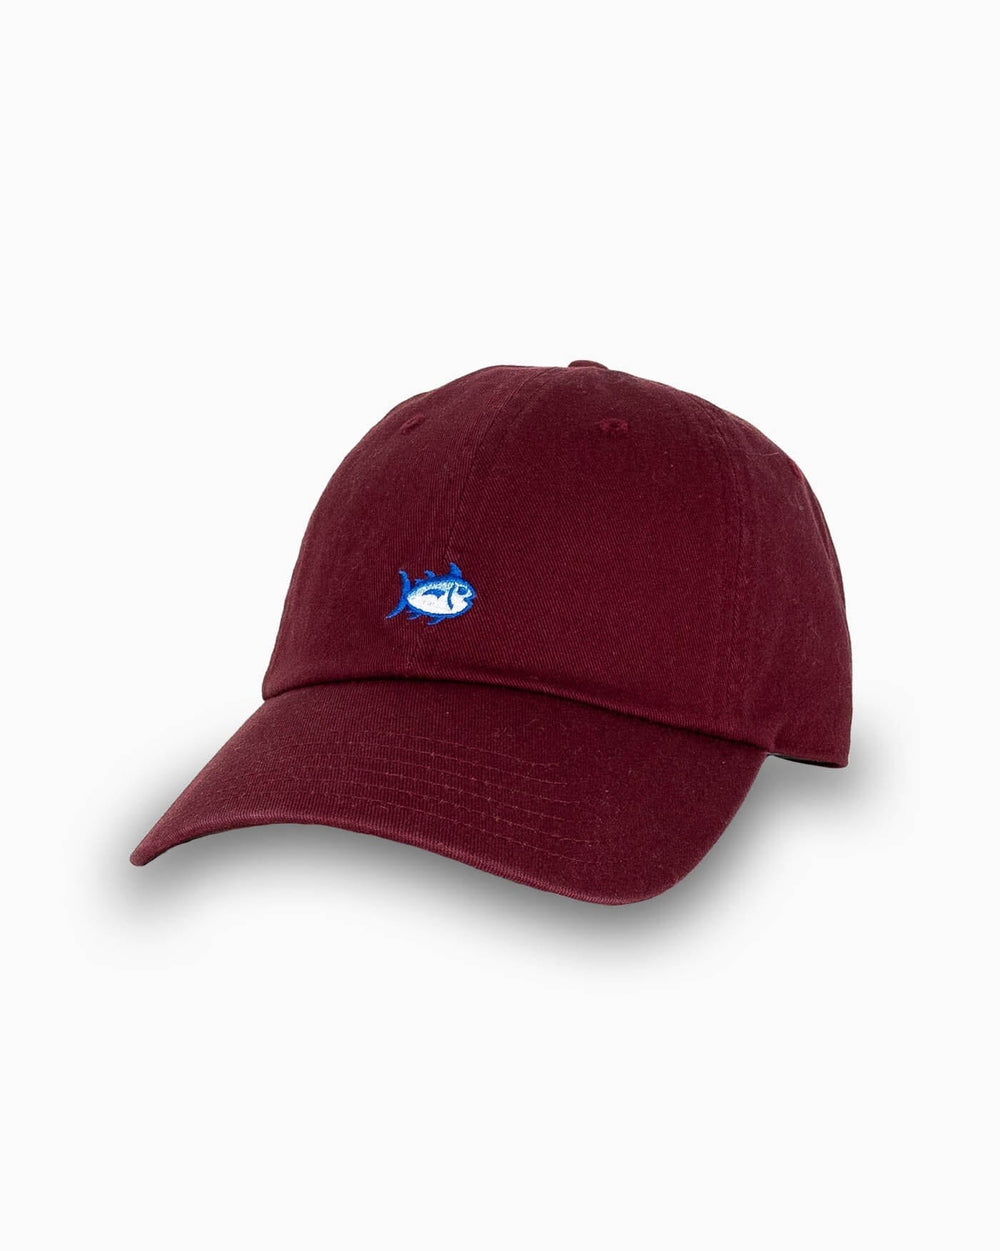 The front view of the Southern Tide mini-skipjack-leather-strap-hat-3 by Southern Tide - Maroon